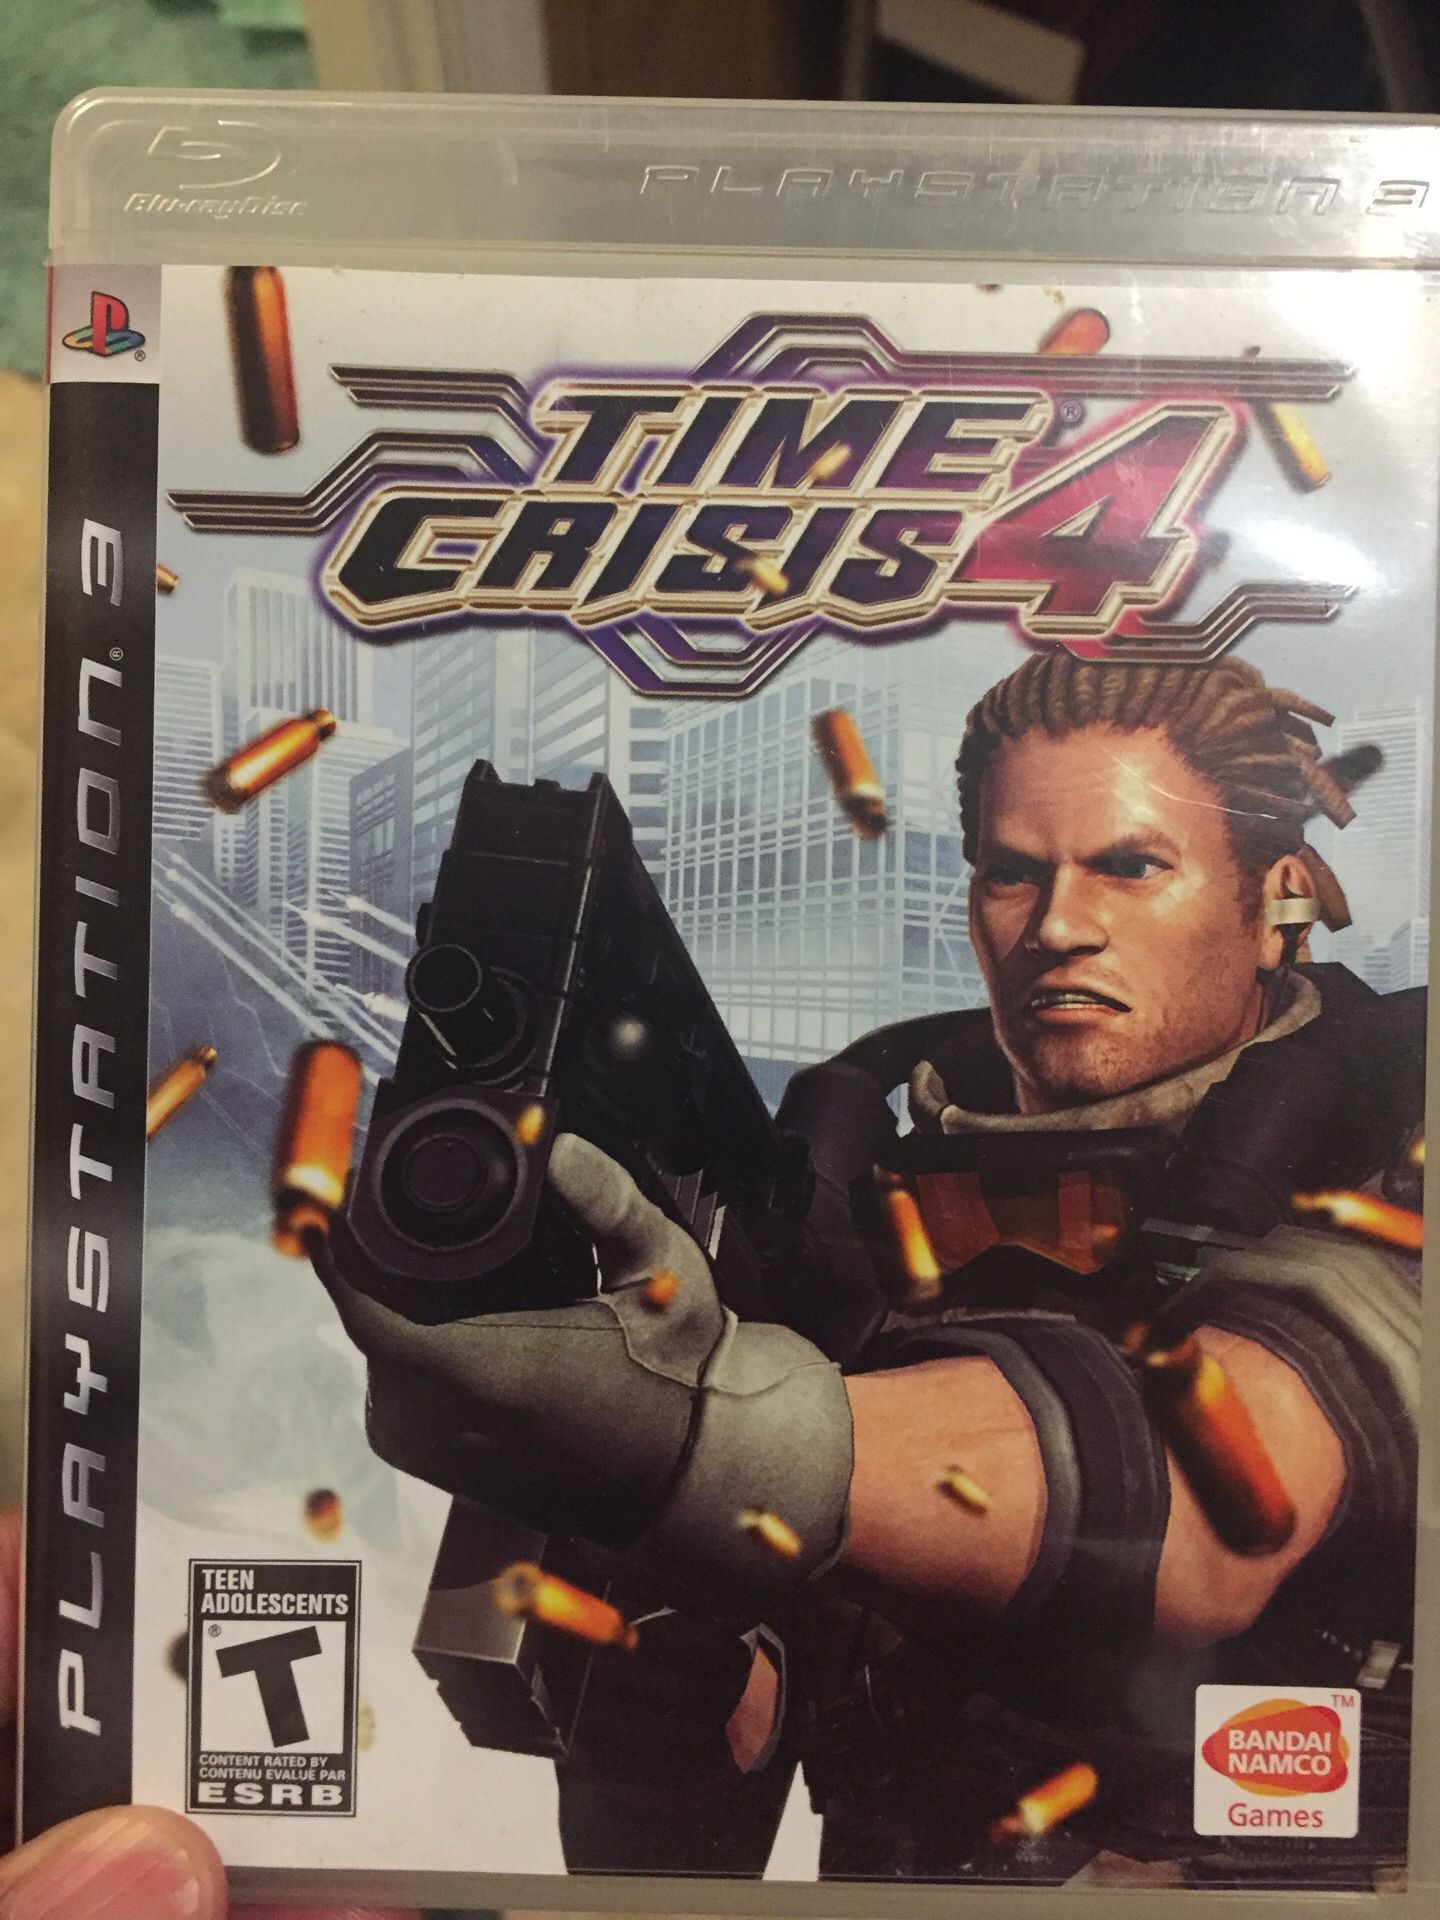 Ps3 time crisis 4 its free just come and pick it up and enjoy some good shooting arcade style fun.